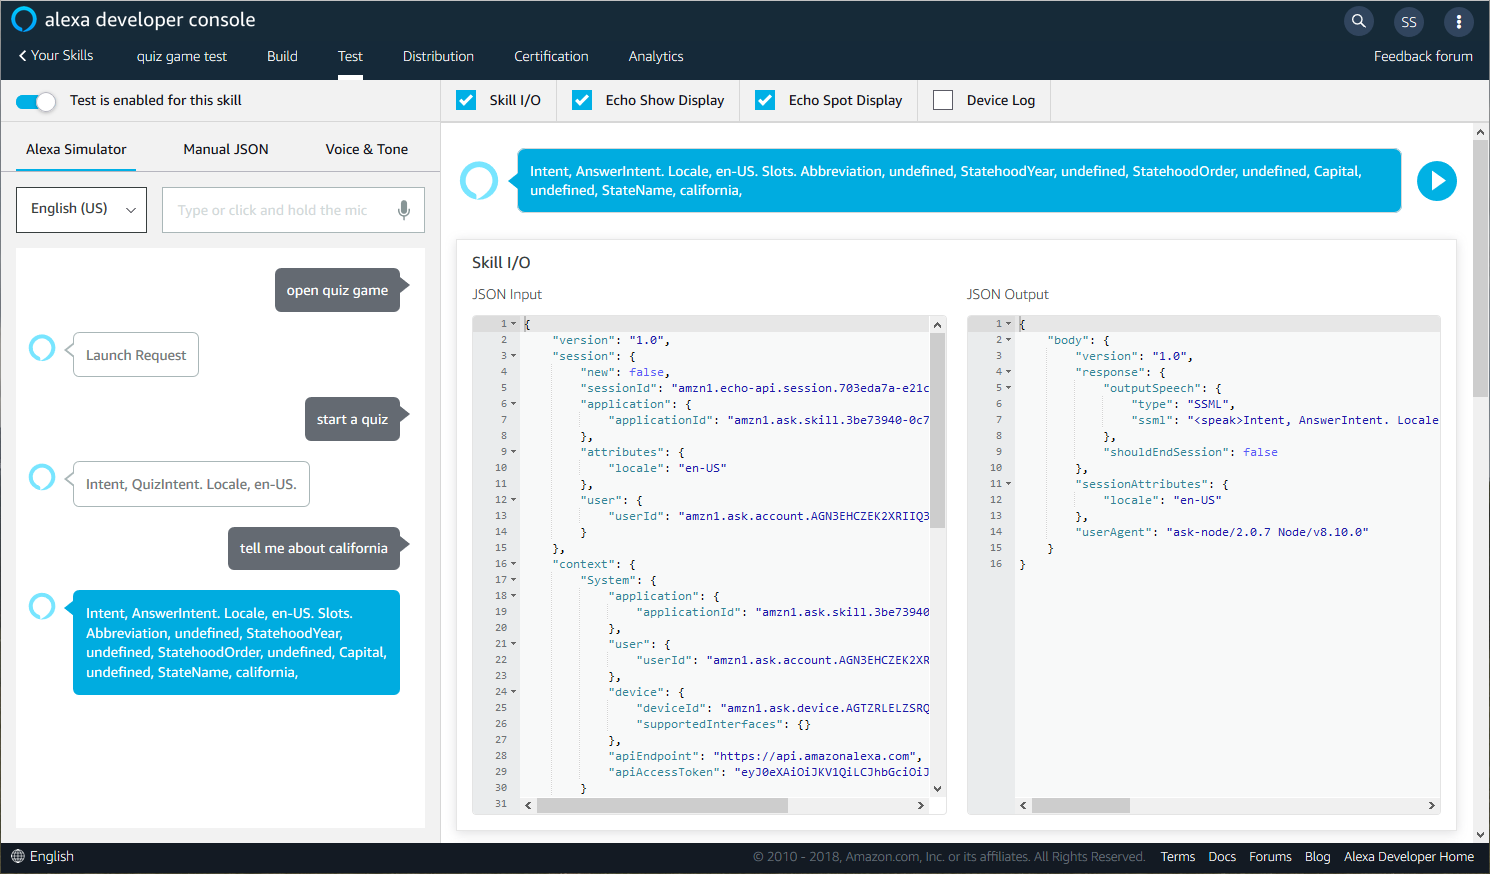 Screenshot of the Alexa Developer console for a generic example skill